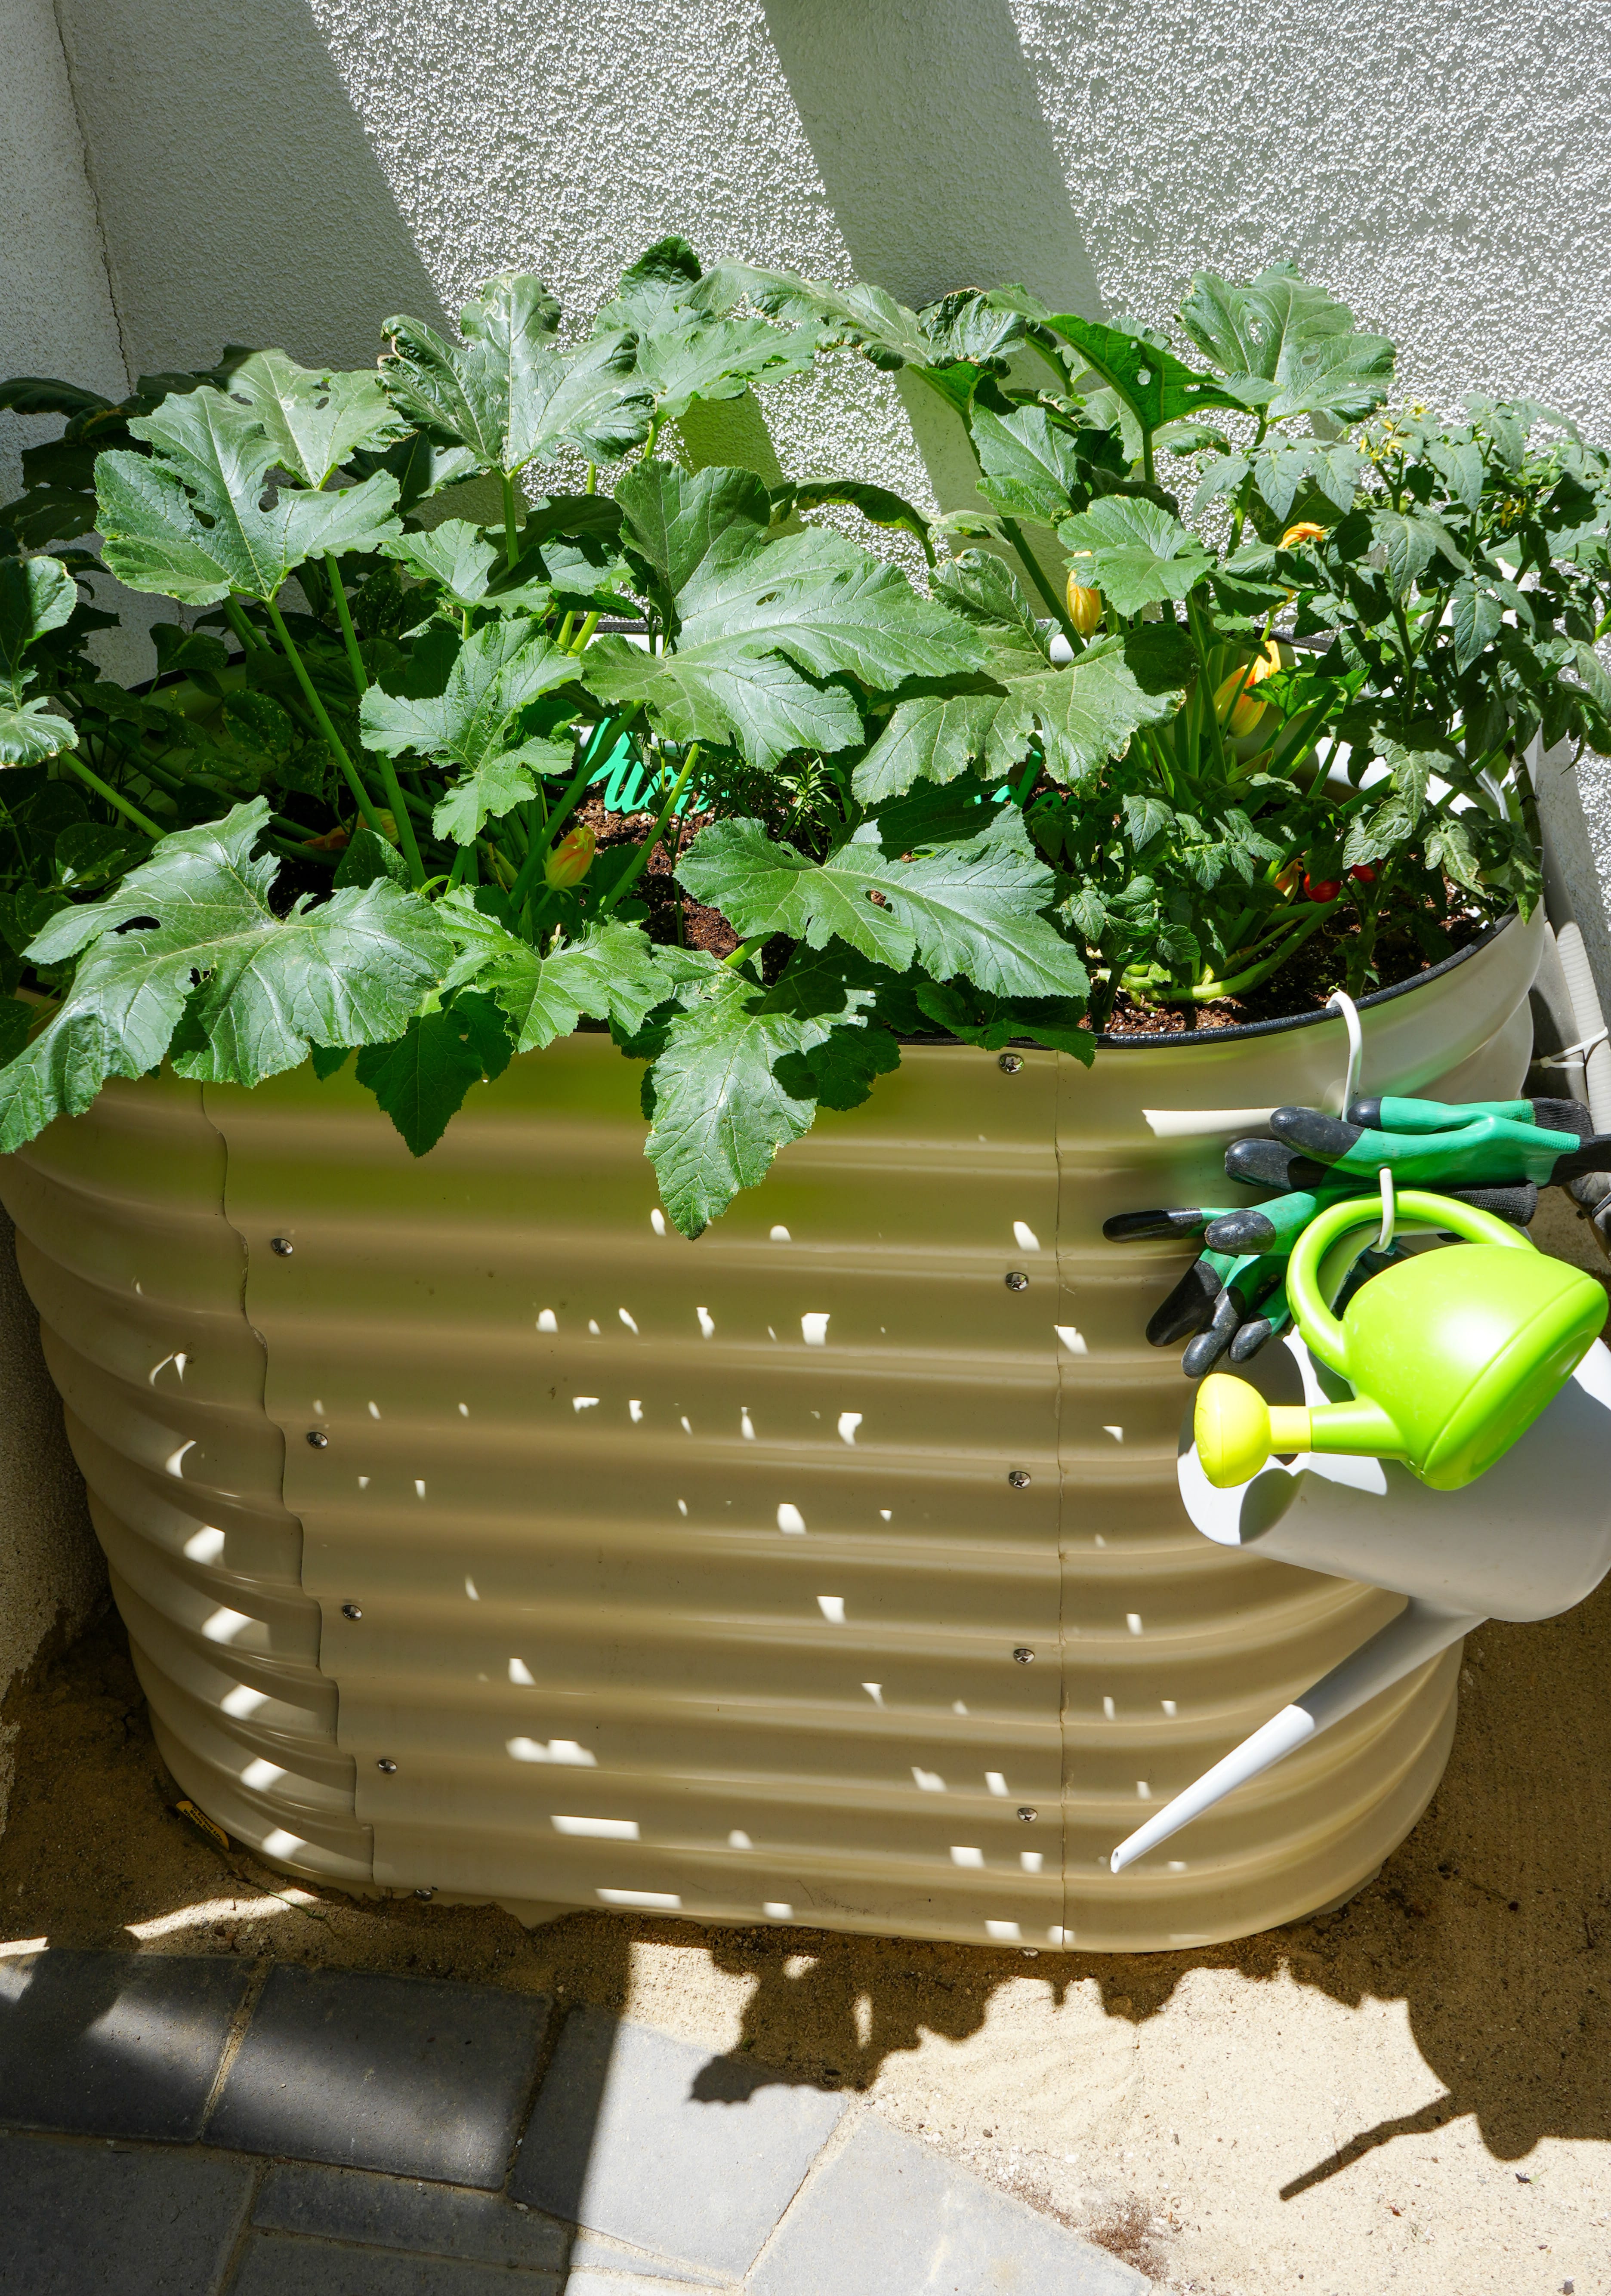 A tall raised garden container filled with zucchini plants. Also shown is garden gloves and watering cans hanging from garden hook.